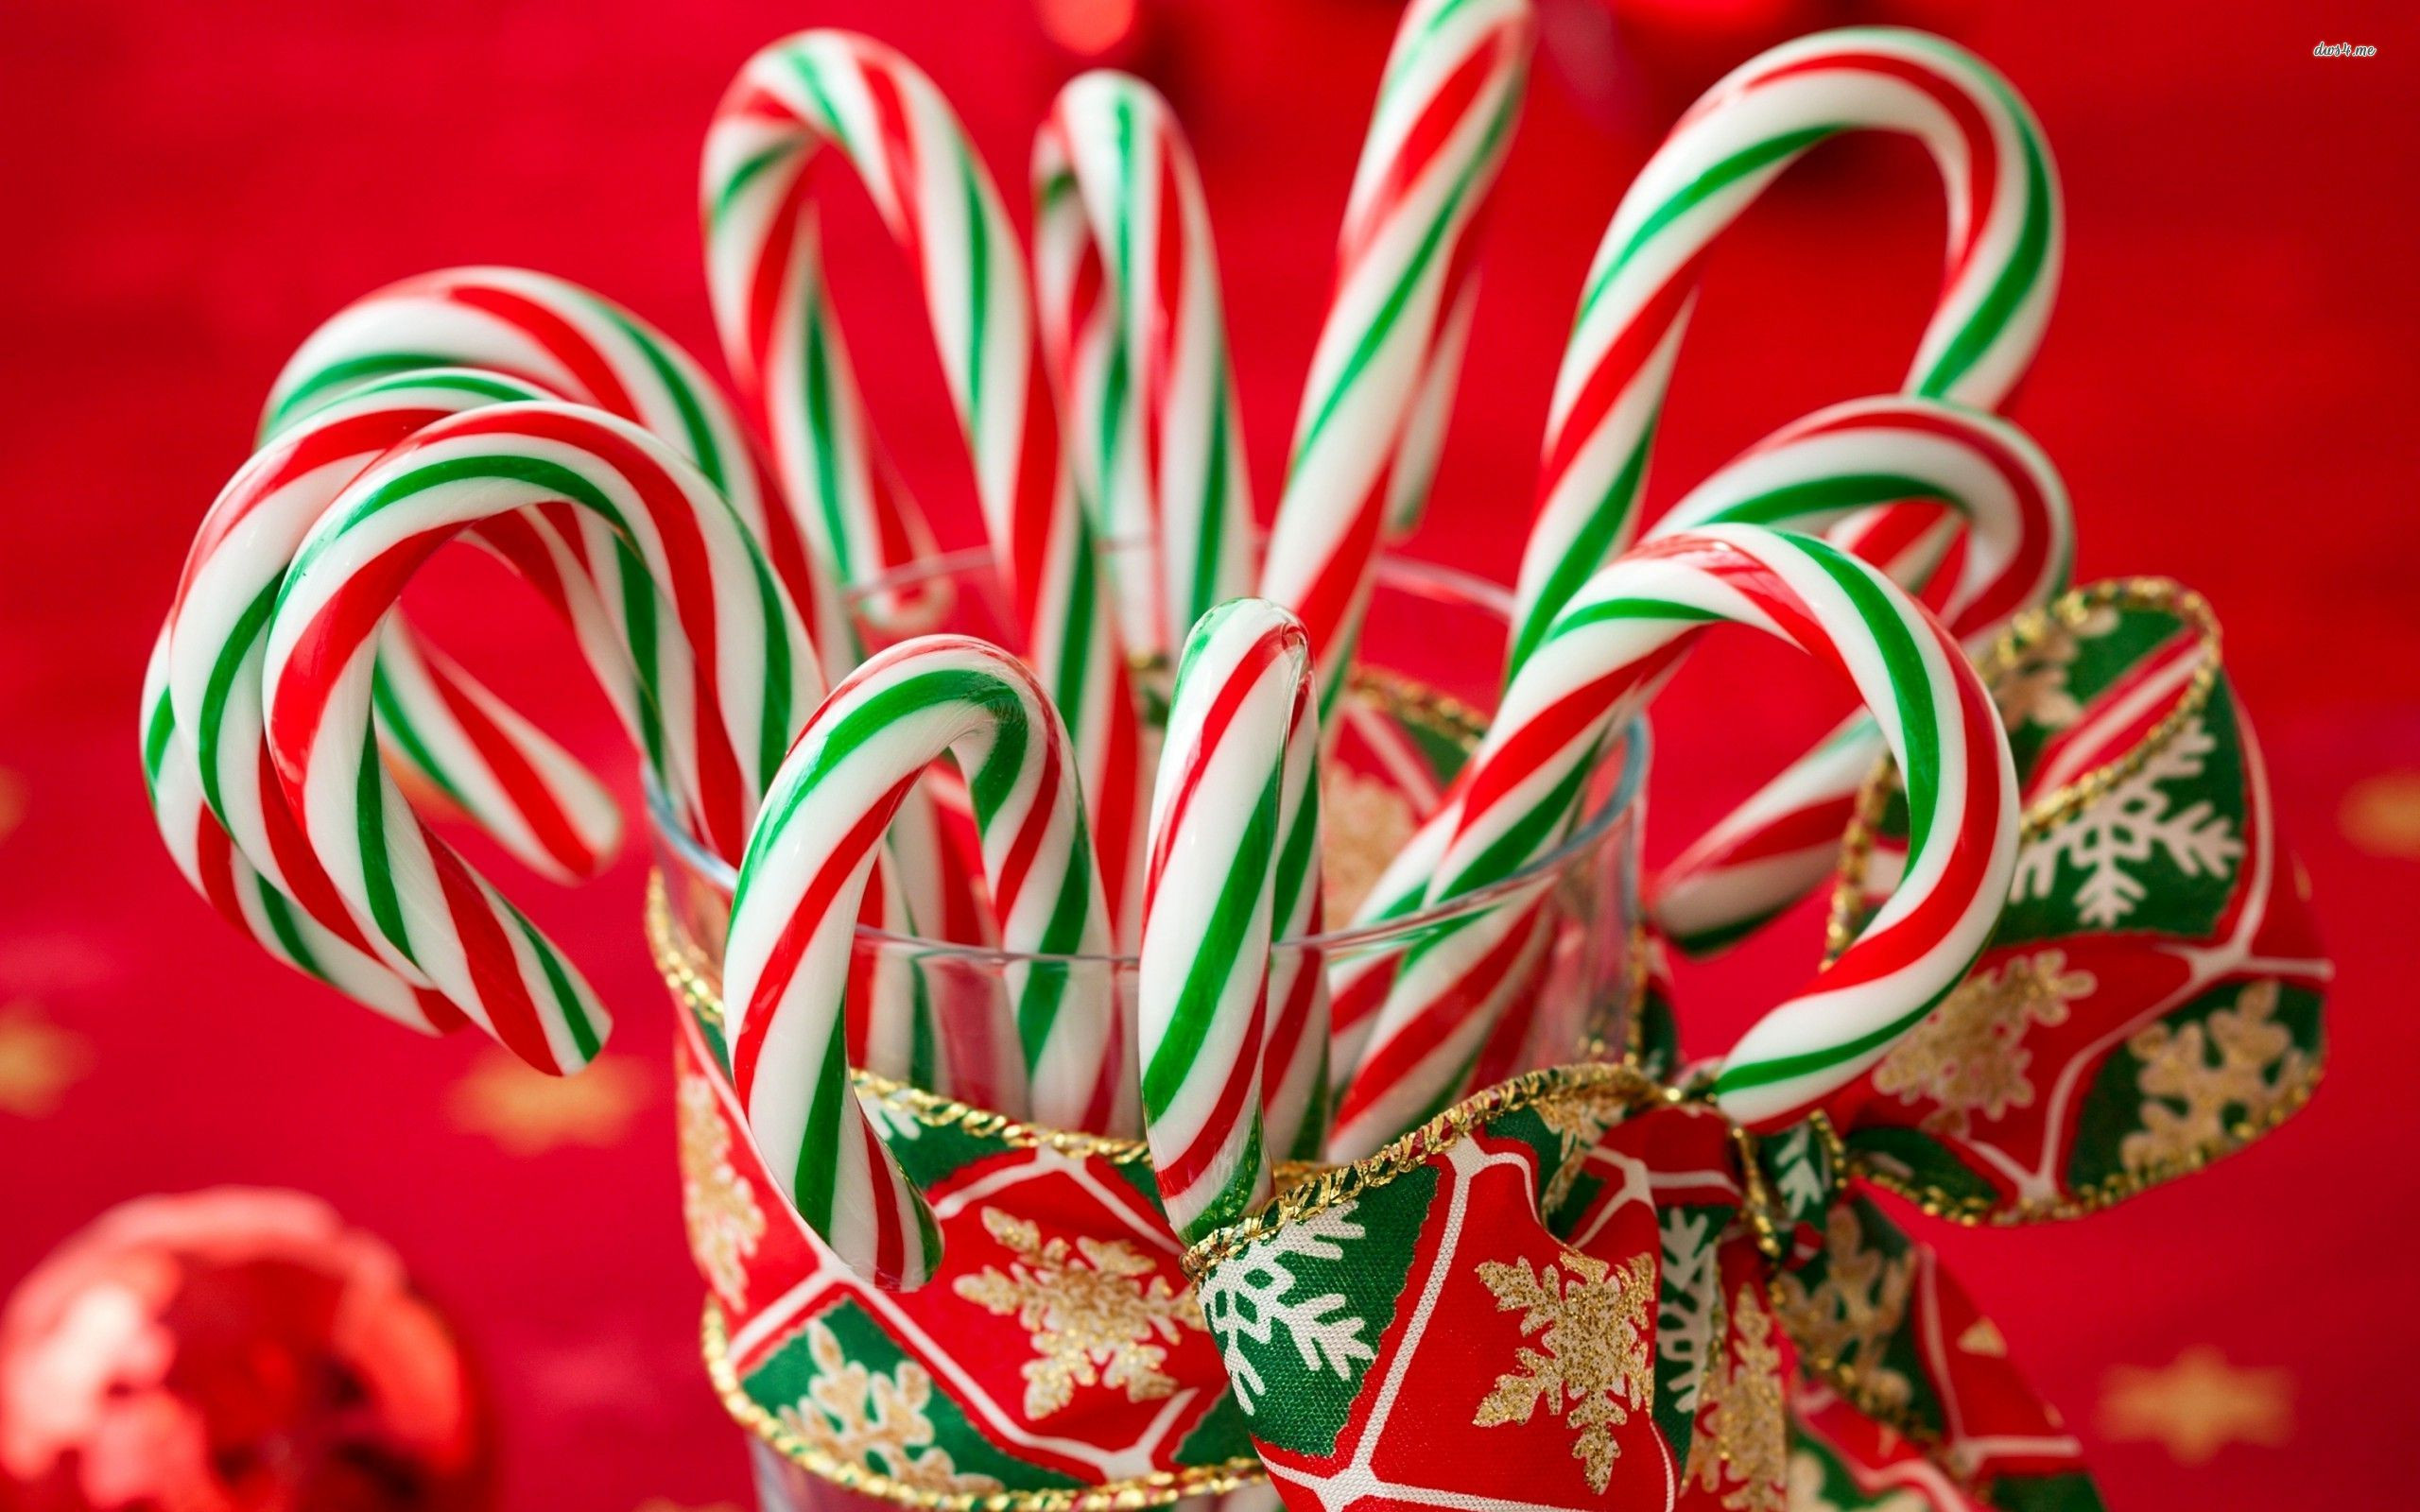 Christmas Candy Cane Images
 Christmas Candy Cane Wallpaper WallpaperSafari